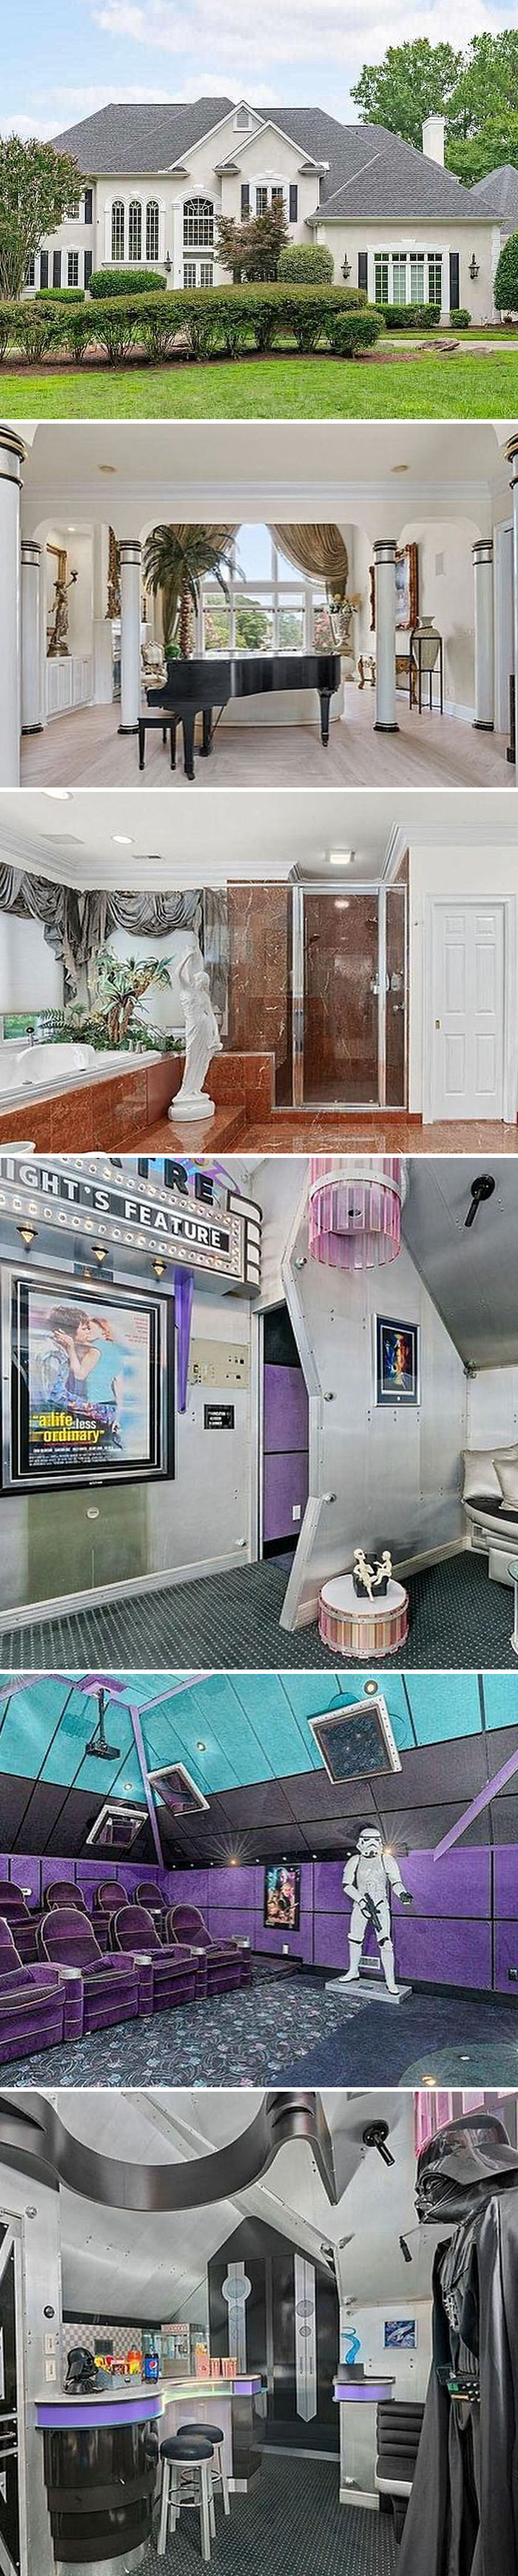 Verified May The Force Be With You. New Star Wars House Just Dropped. $1,550,000